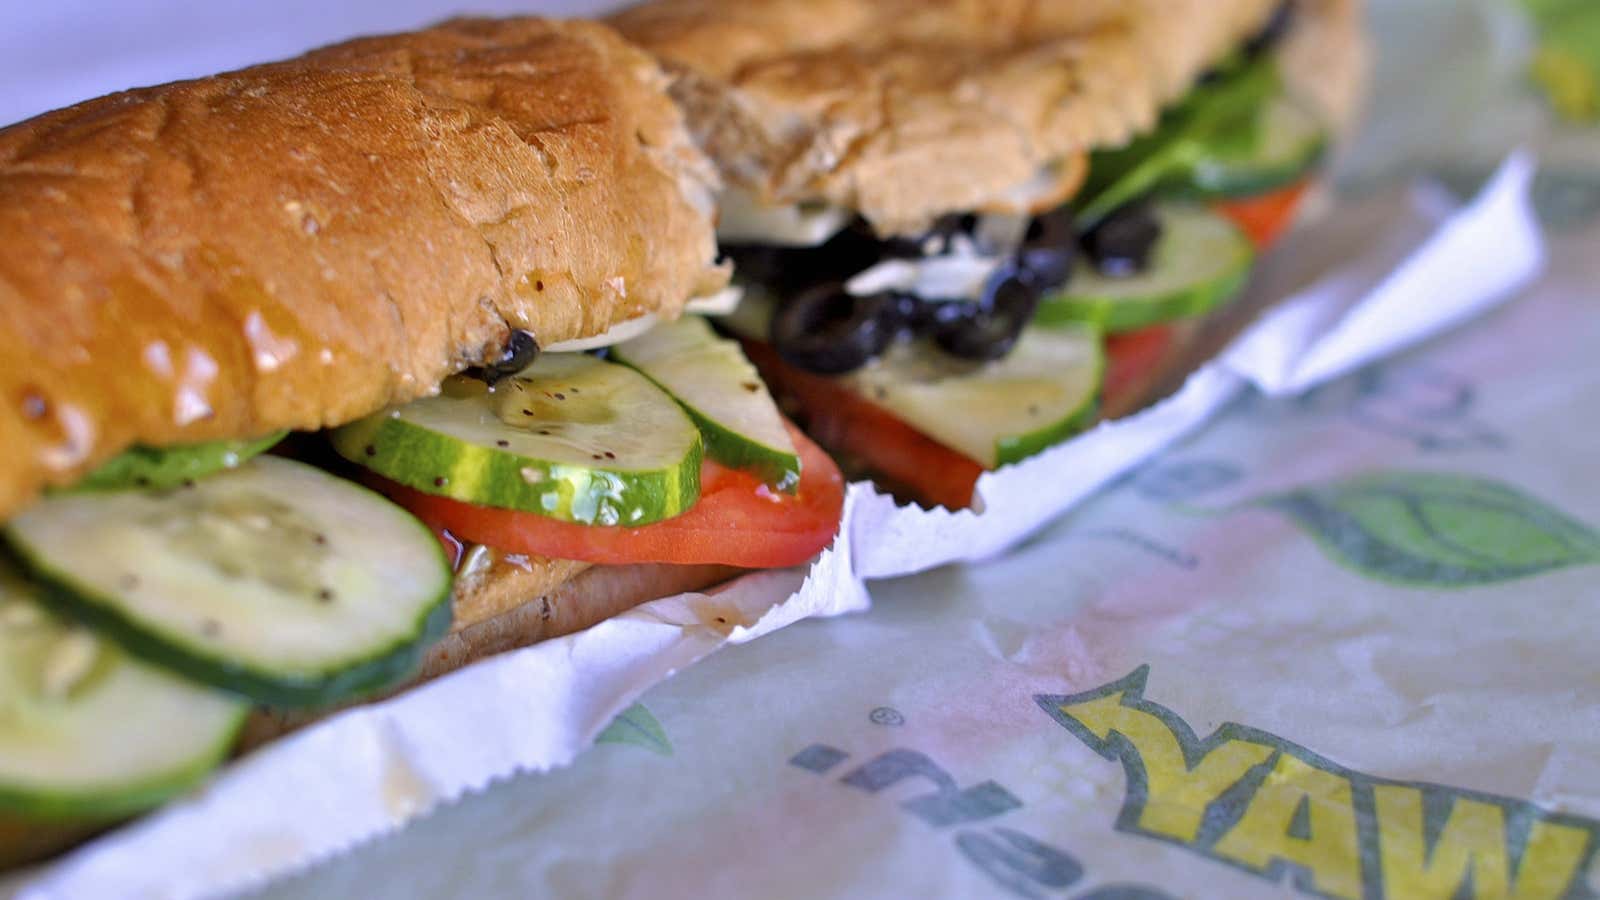 Subway sandwiches, coming to you soon without artificial ingredients.